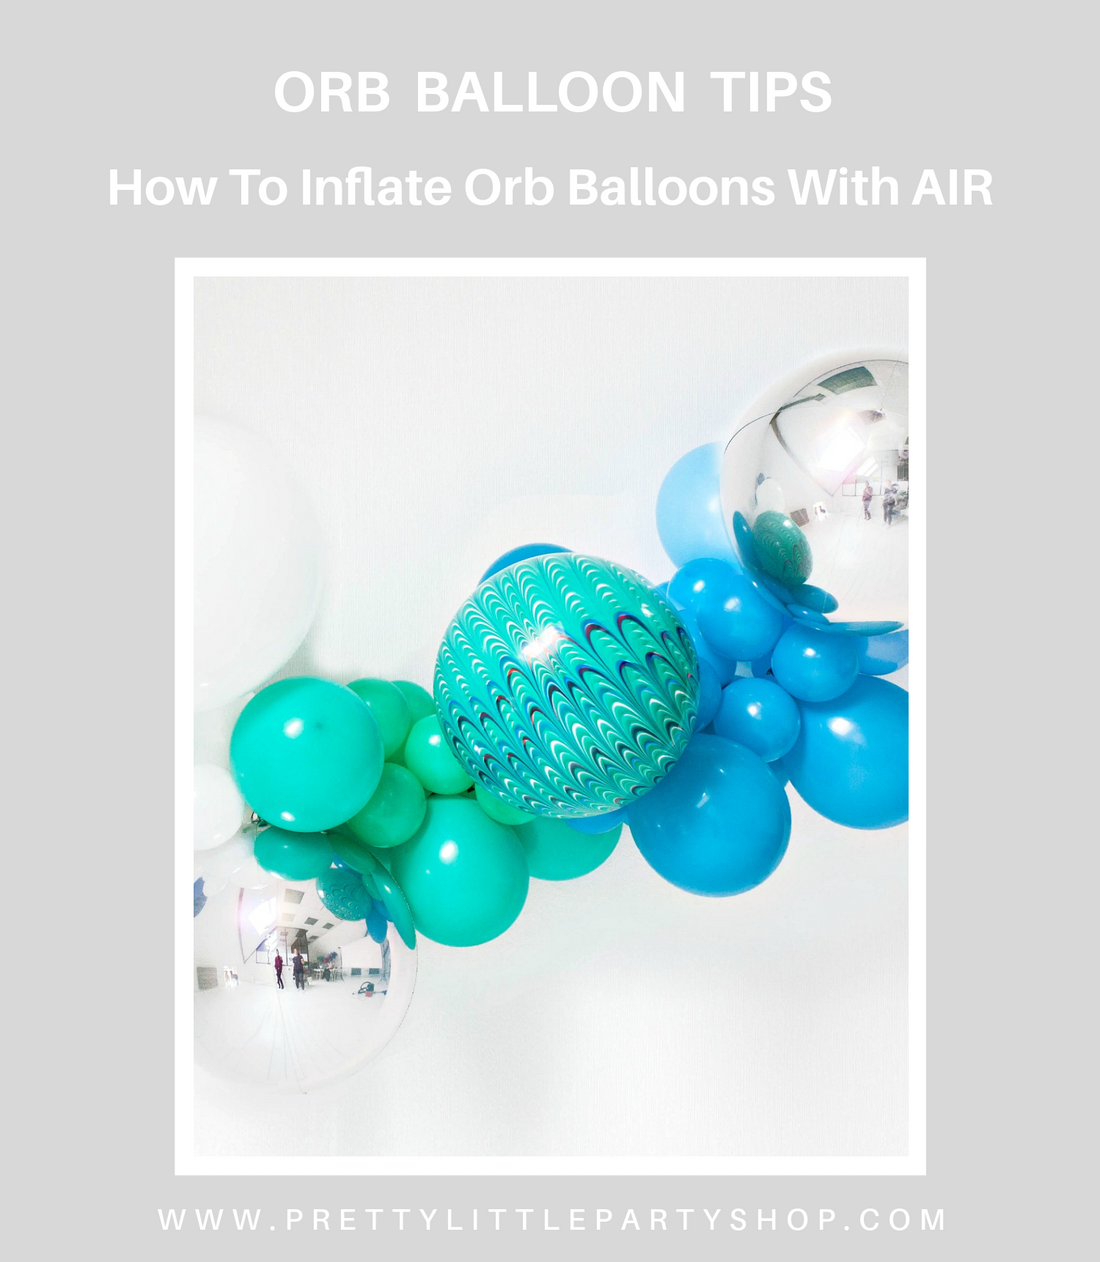 How To Inflate Orb Balloons With Air